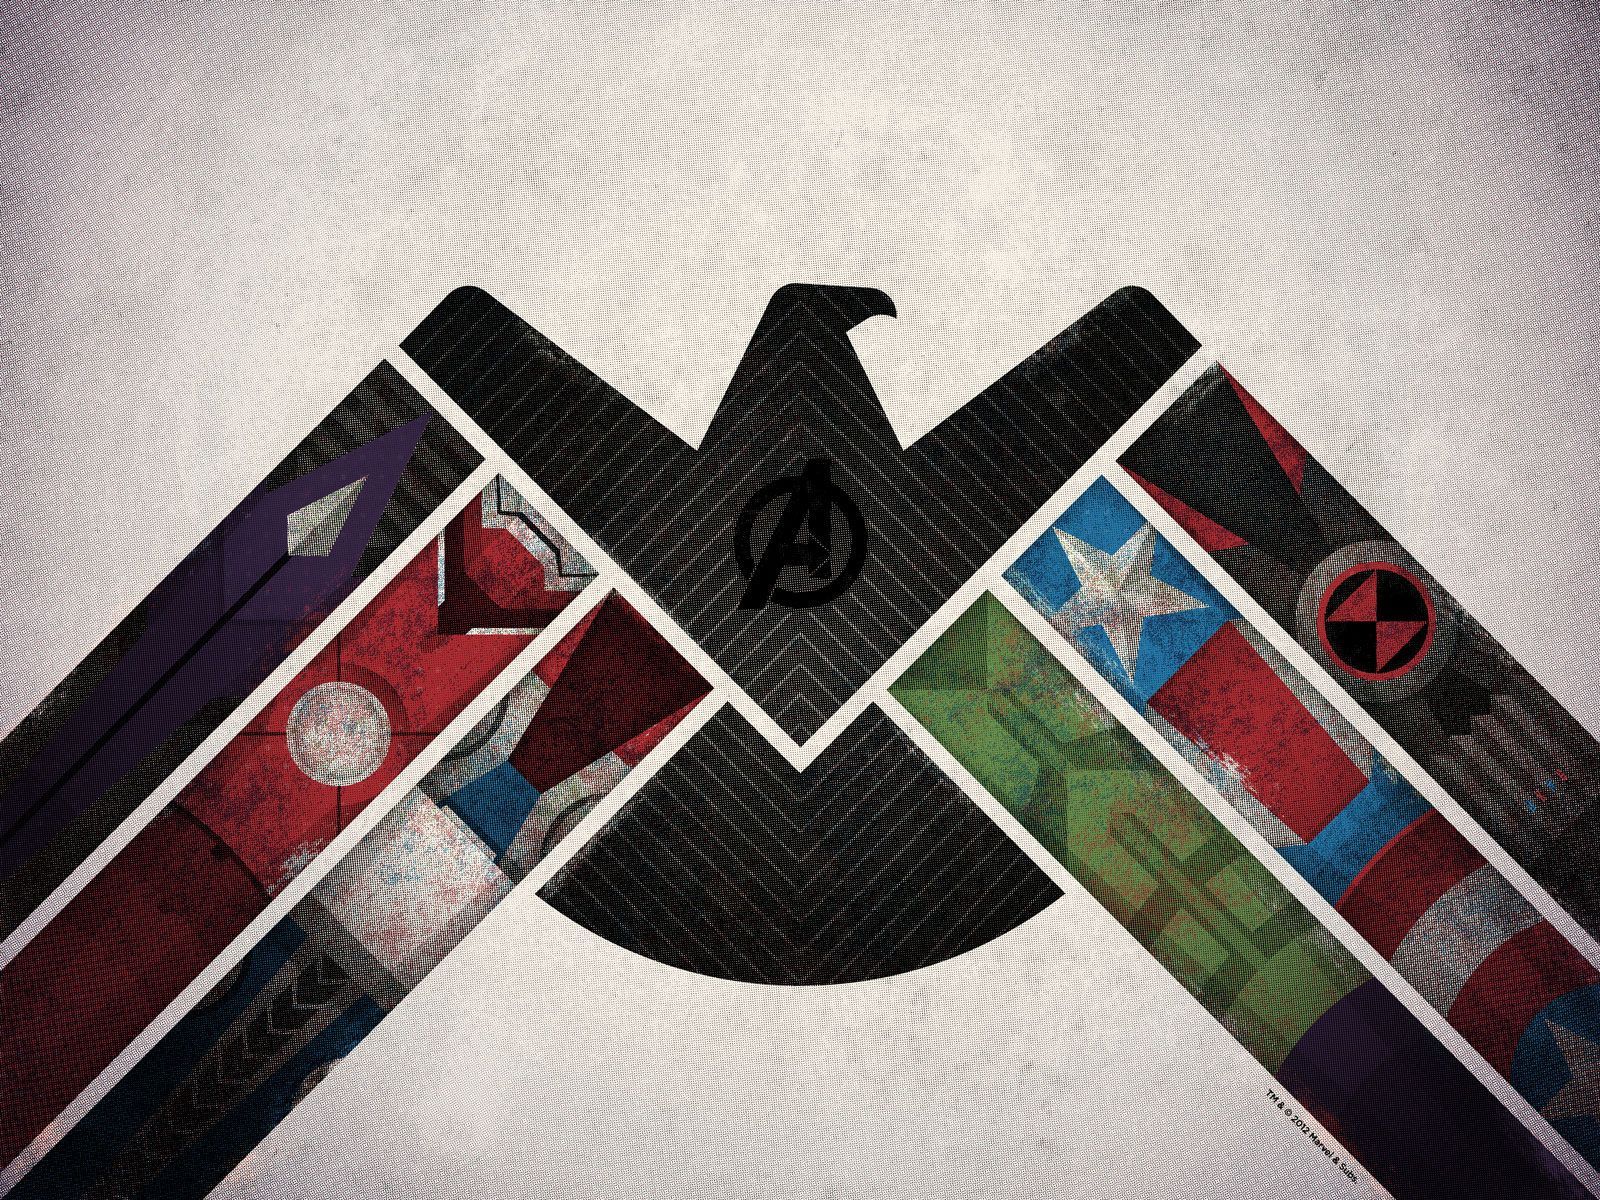 Free download Download The Avengers Poster Alternative Art Print